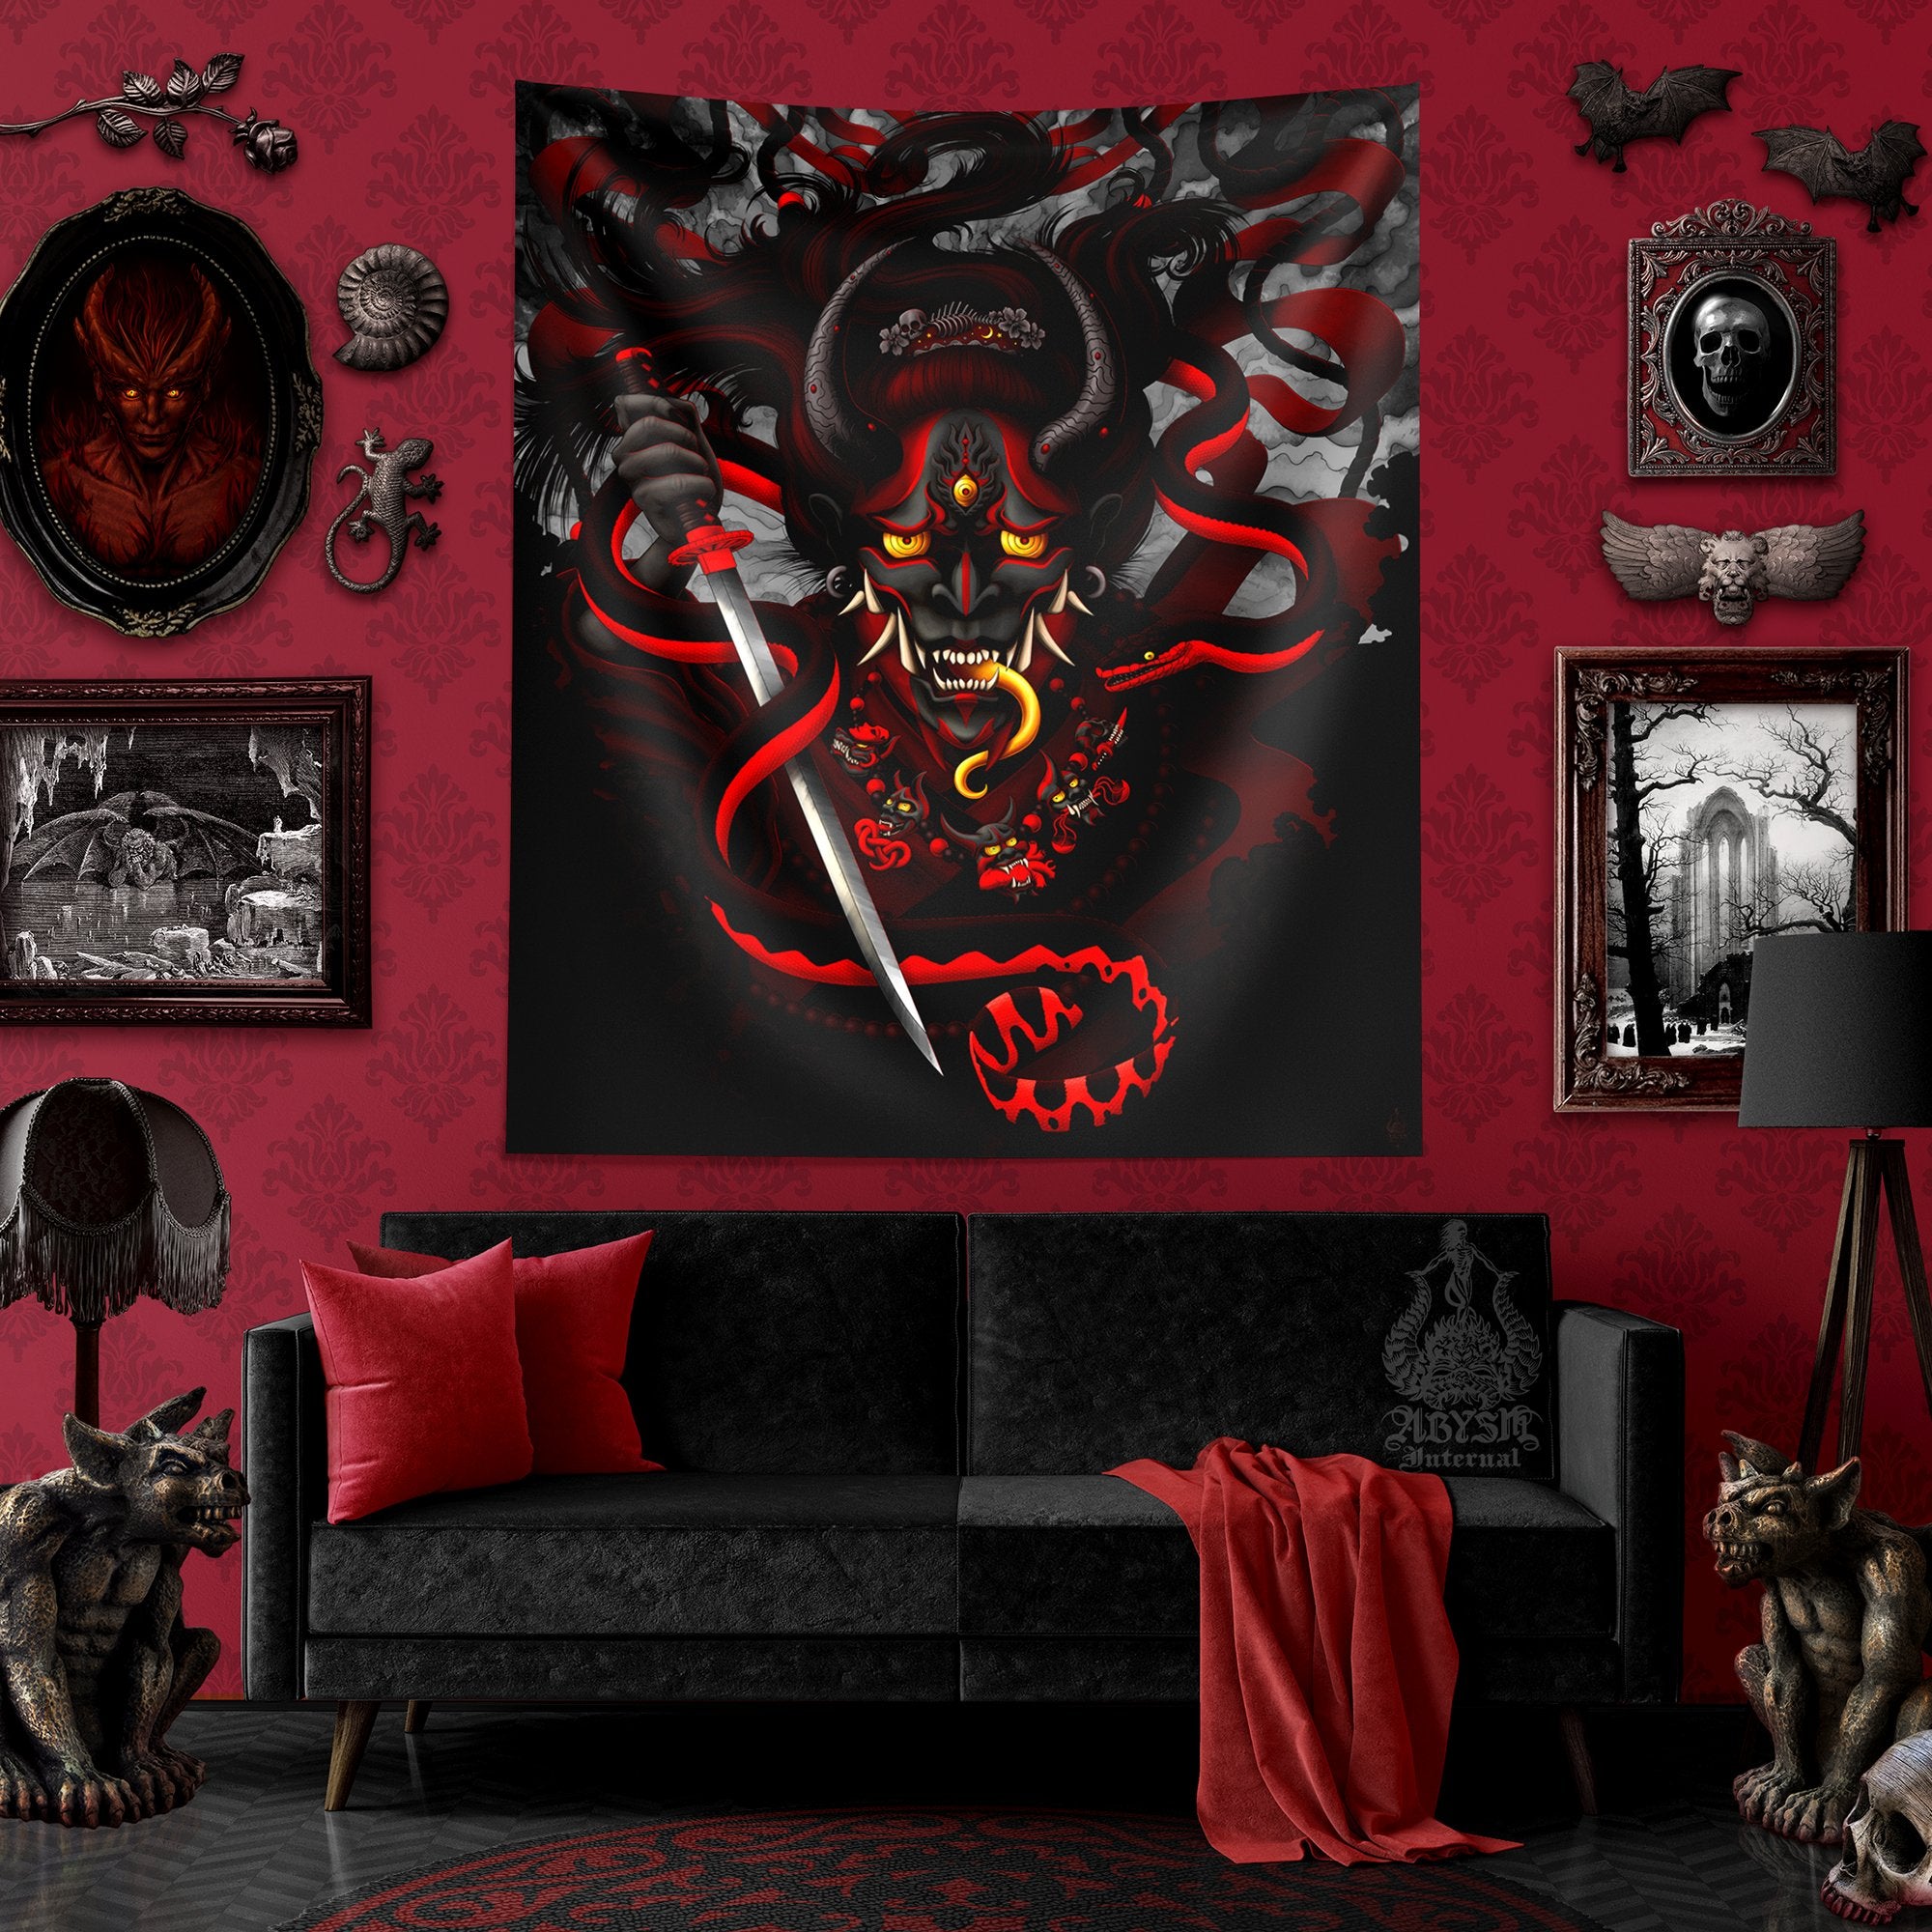 Gothic Demon Tapestry, Goth Japanese Hannya and Snake Wall Hanging, Manga, Anime and Gamer Room Decor, Vertical Art Print - Black red - Abysm Internal